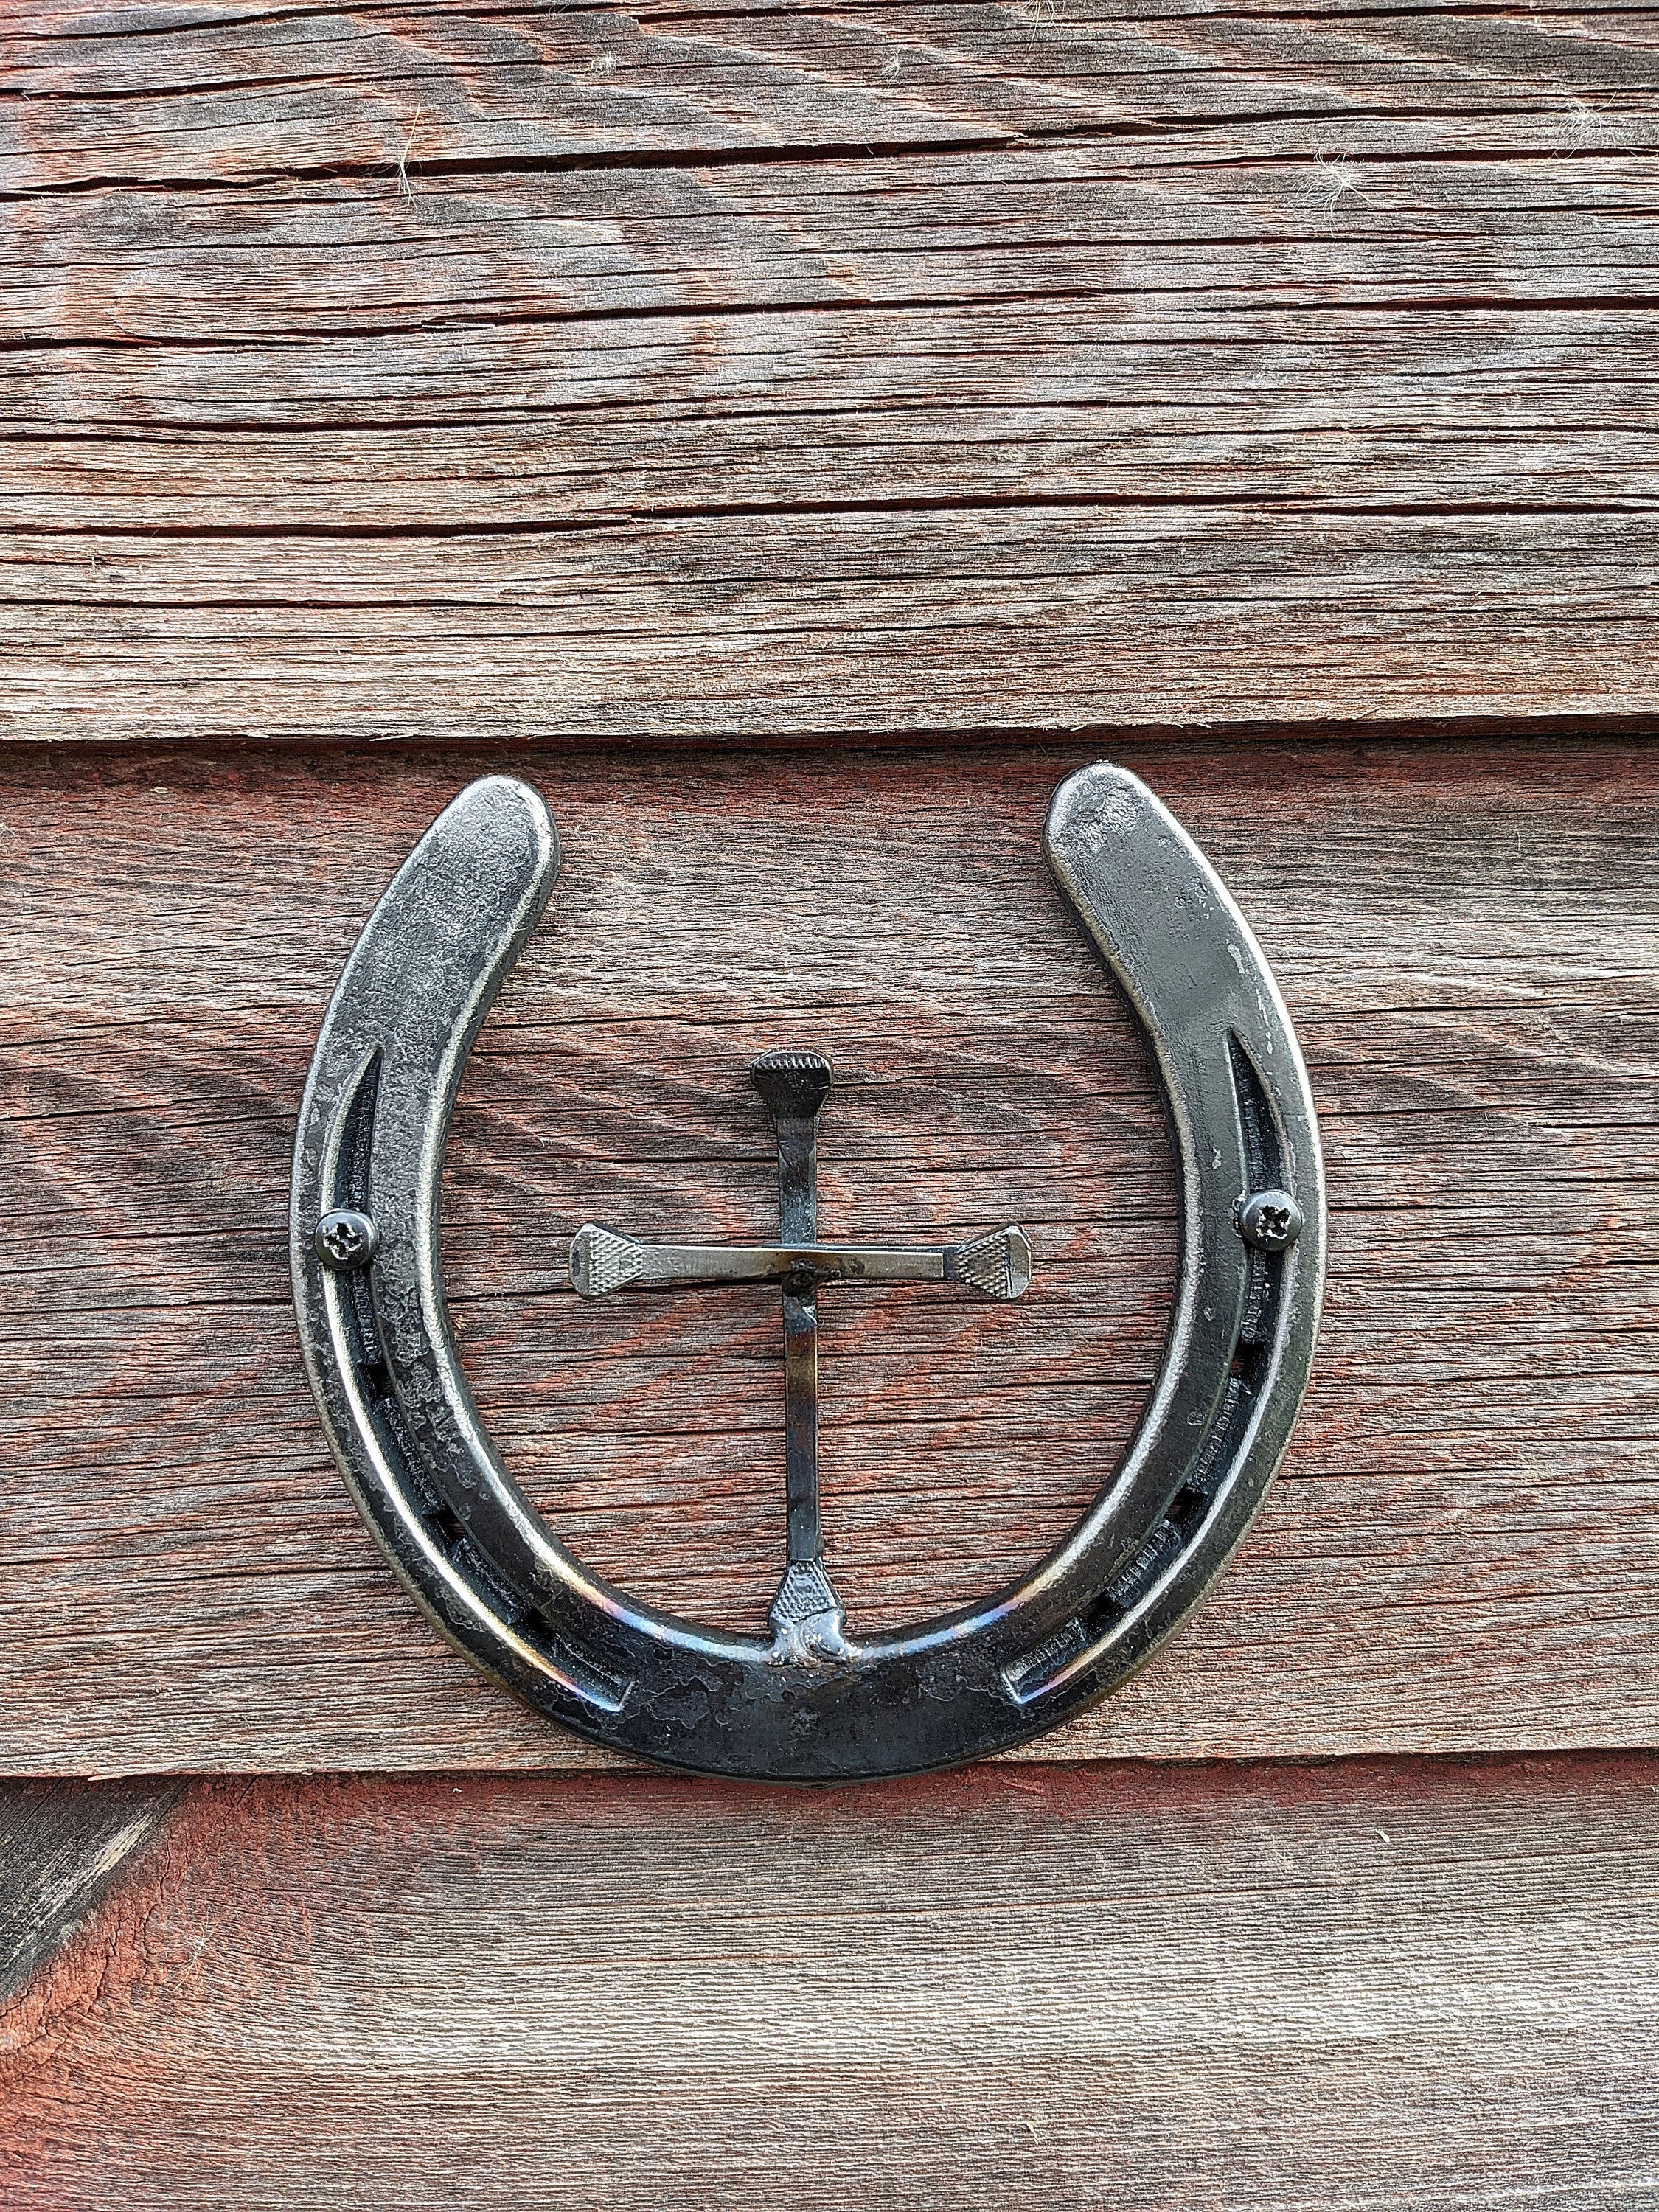 Horse Shoe Nails: Over 1,770 Royalty-Free Licensable Stock Photos |  Shutterstock